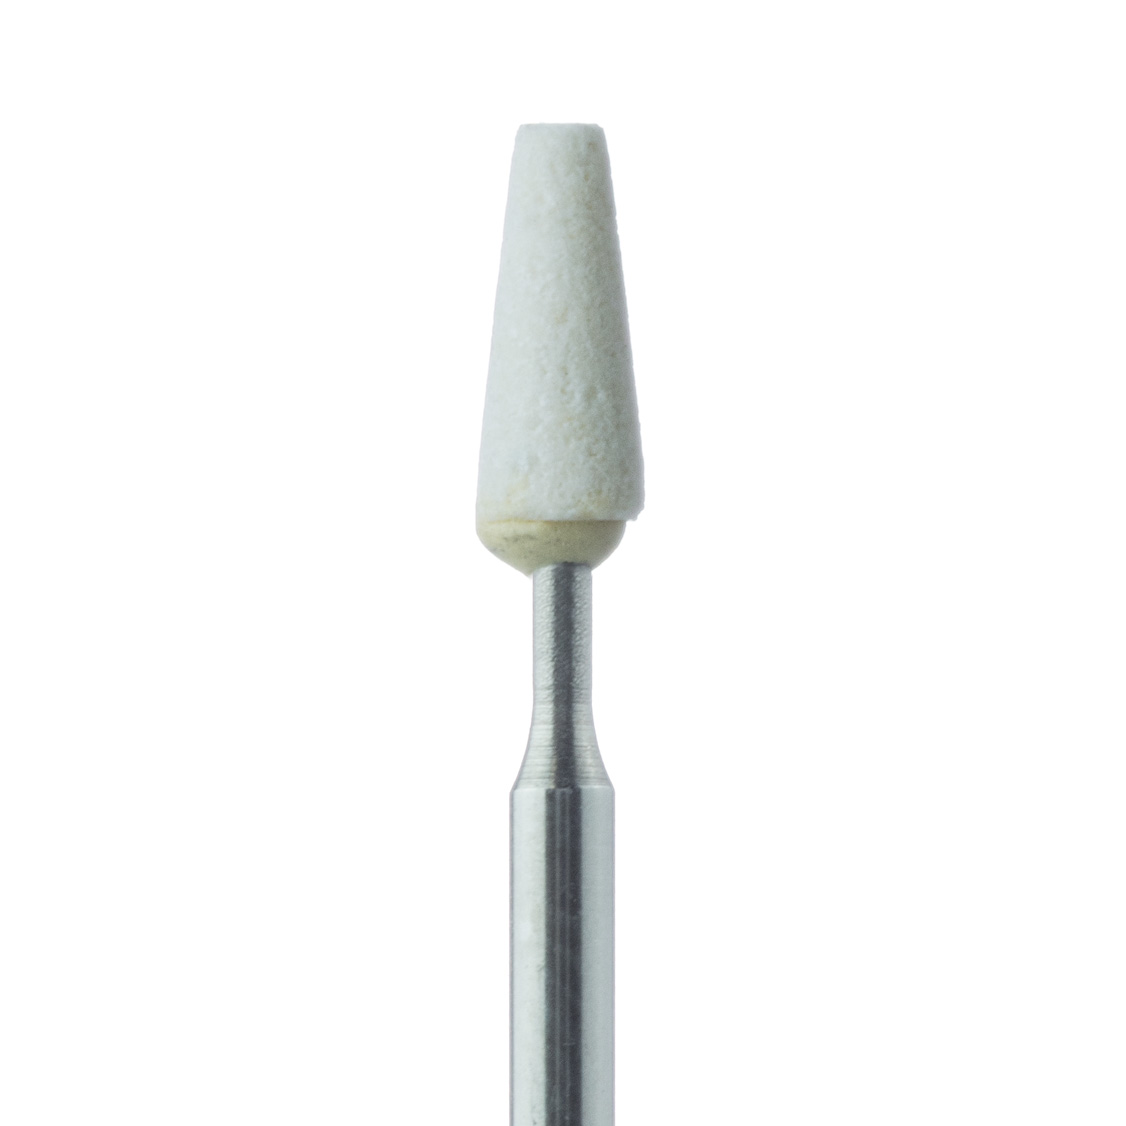 649XF-025-FG-WH Abrasive, White, Tapered Flat End, 2.5mm Ø, Extra Fine, FG